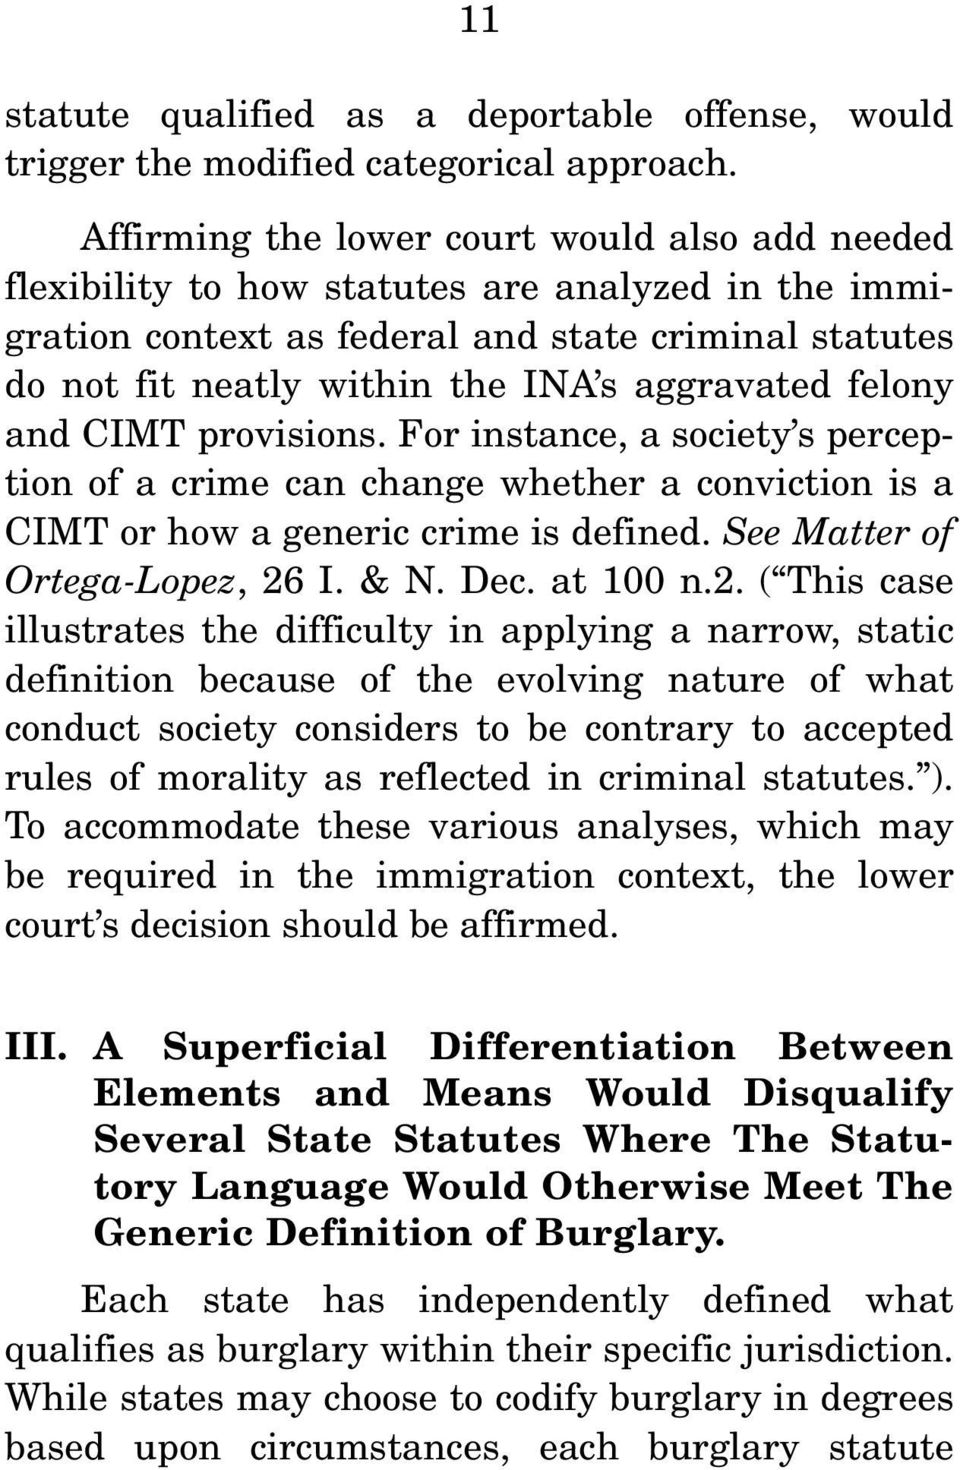 aggravated felony and CIMT provisions. For instance, a society s perception of a crime can change whether a conviction is a CIMT or how a generic crime is defined. See Matter of Ortega-Lopez, 26 I.